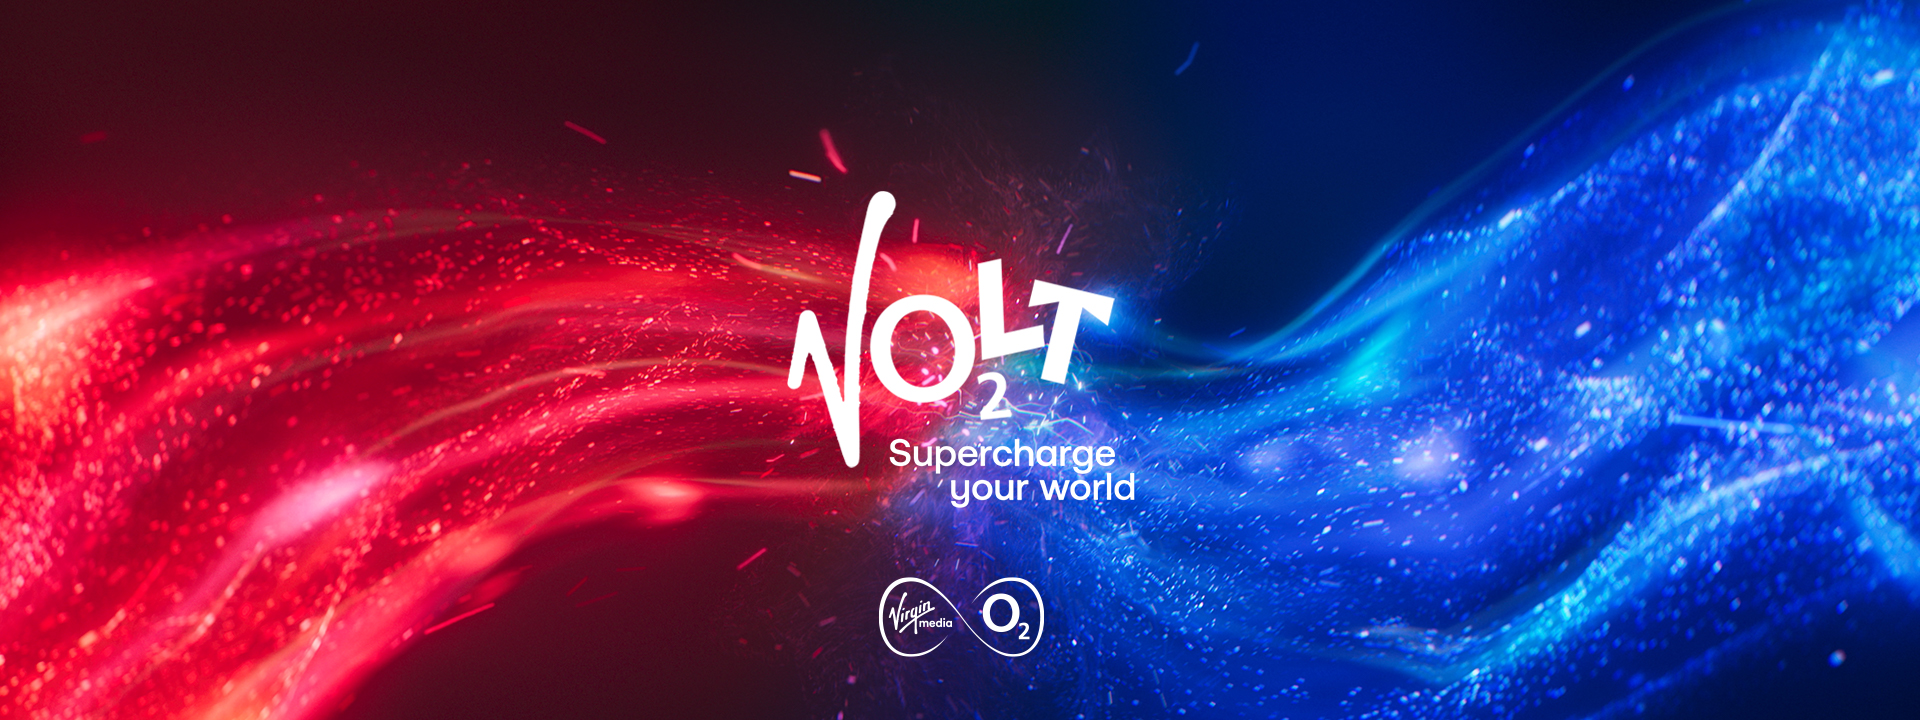 A red wave collides with a blue wave of light. The Volt logo in the middle with O2 logo and 'Supercharge your world' written beneath.